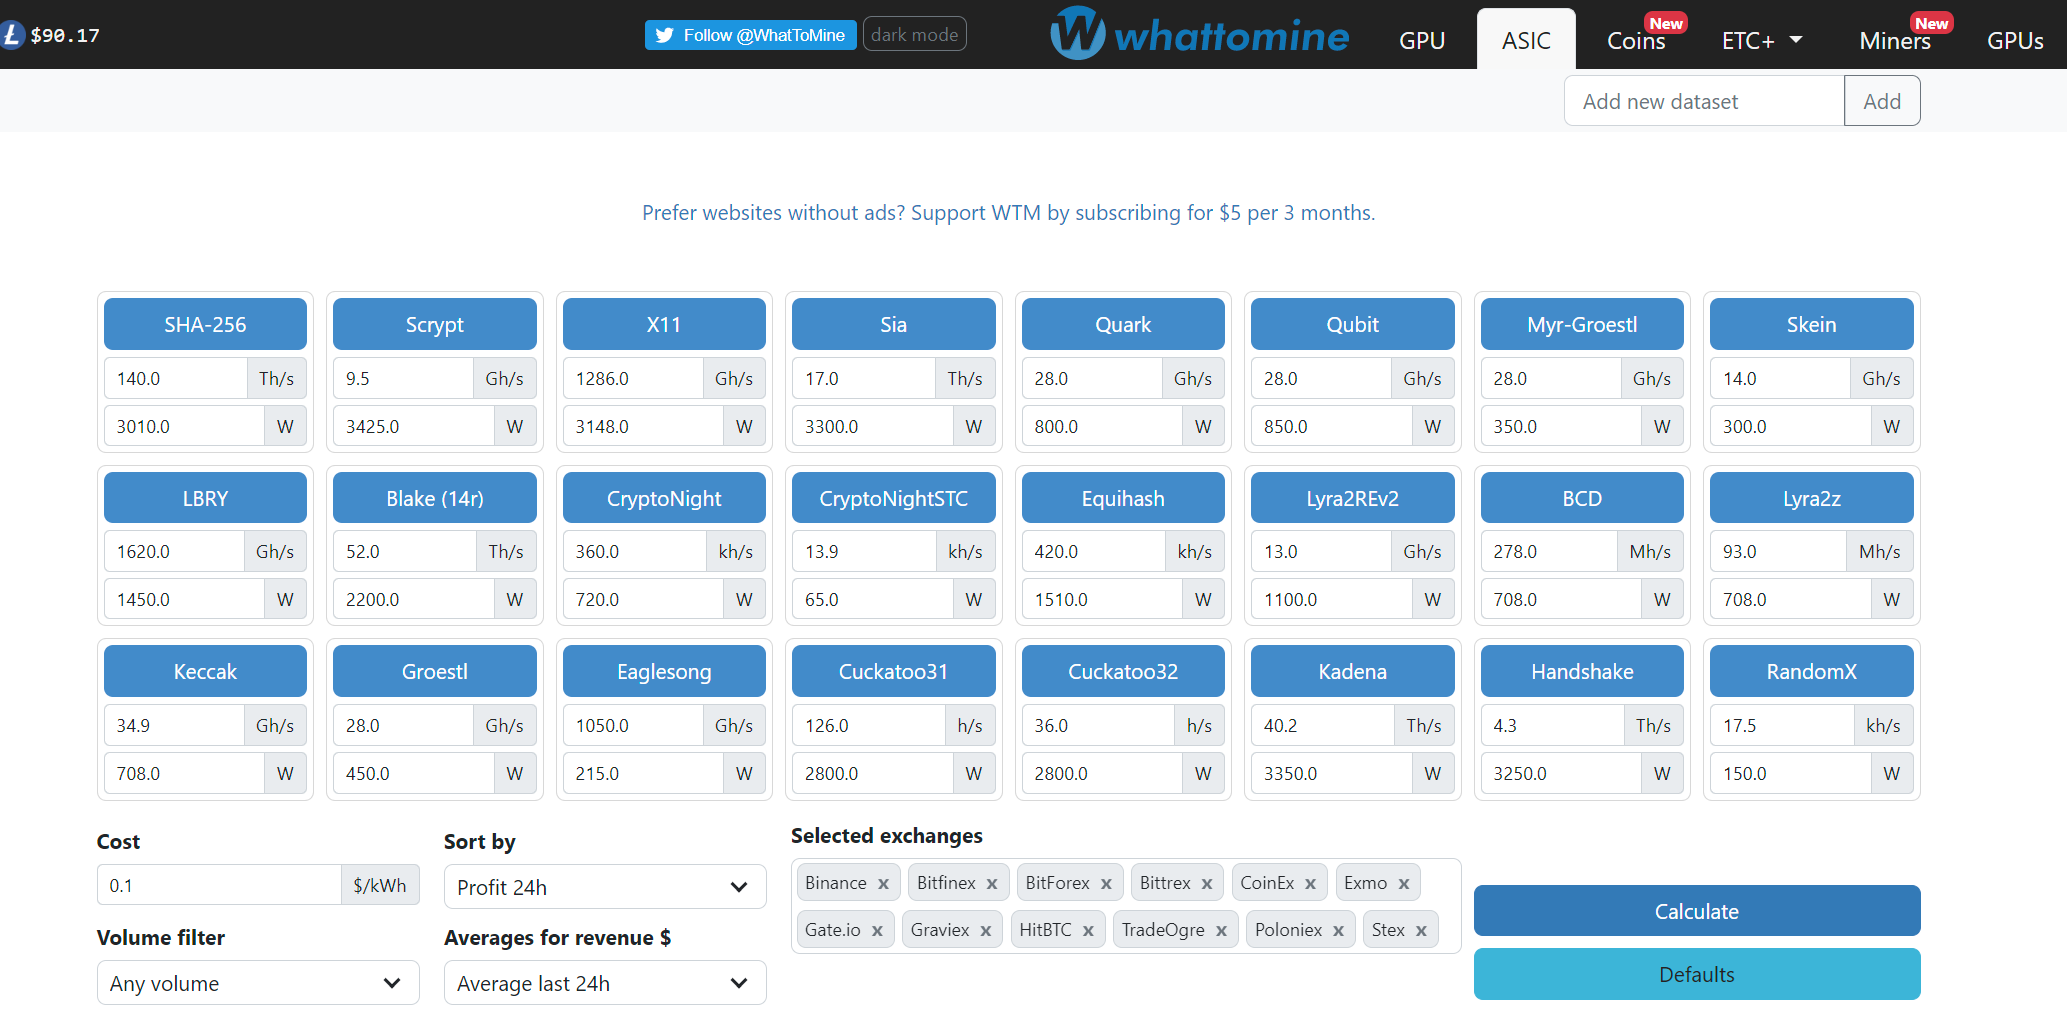 whattomimne asic calculator